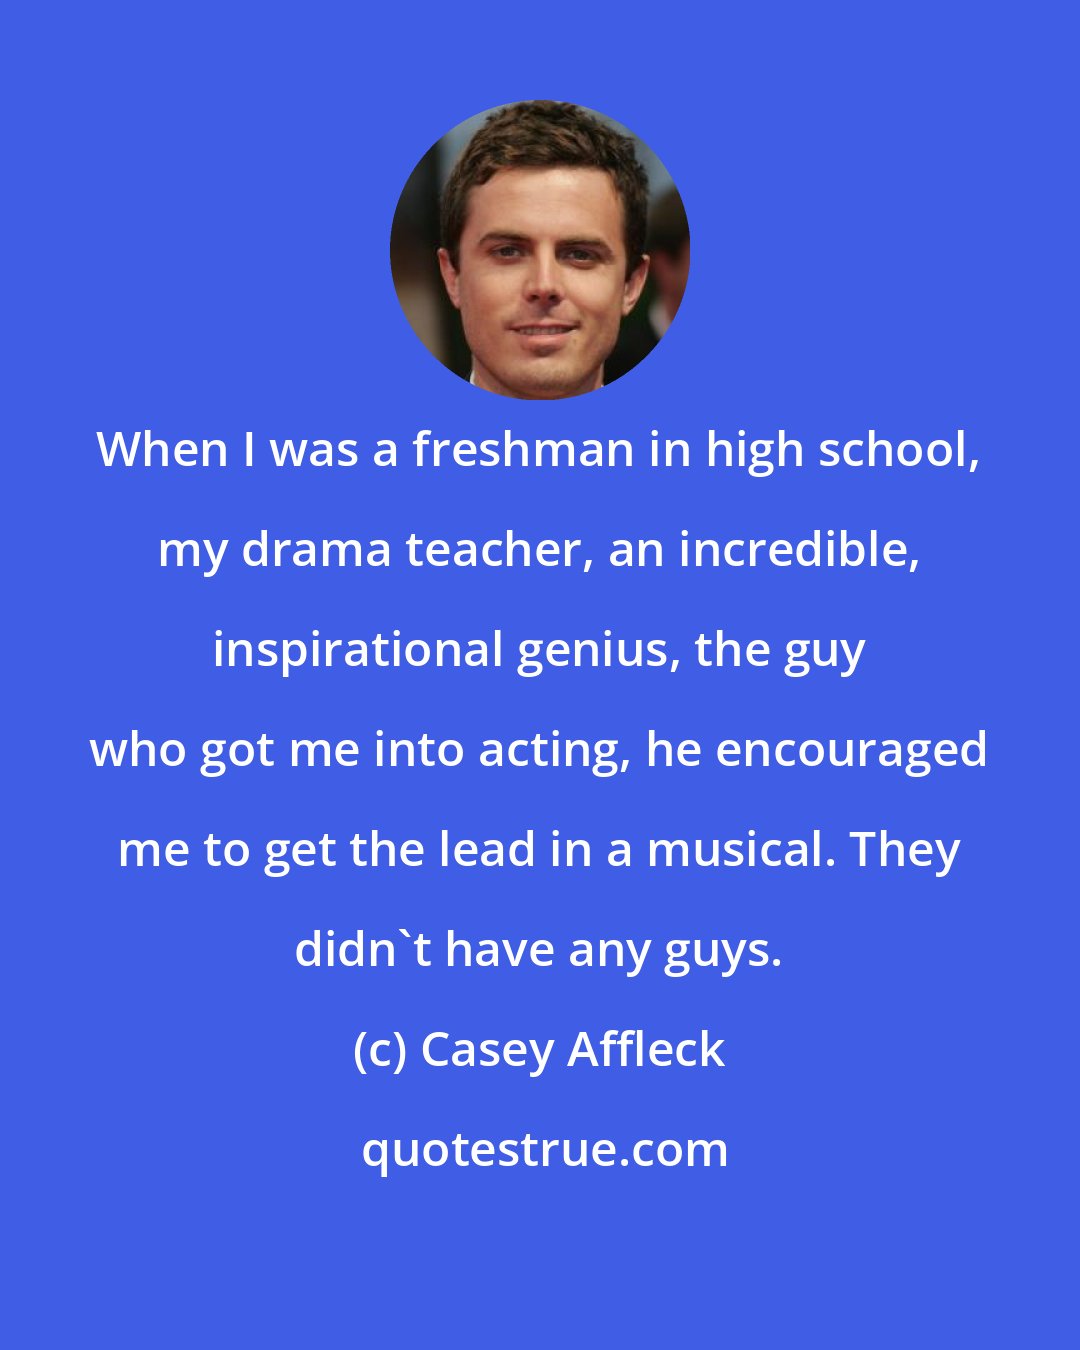 Casey Affleck: When I was a freshman in high school, my drama teacher, an incredible, inspirational genius, the guy who got me into acting, he encouraged me to get the lead in a musical. They didn't have any guys.